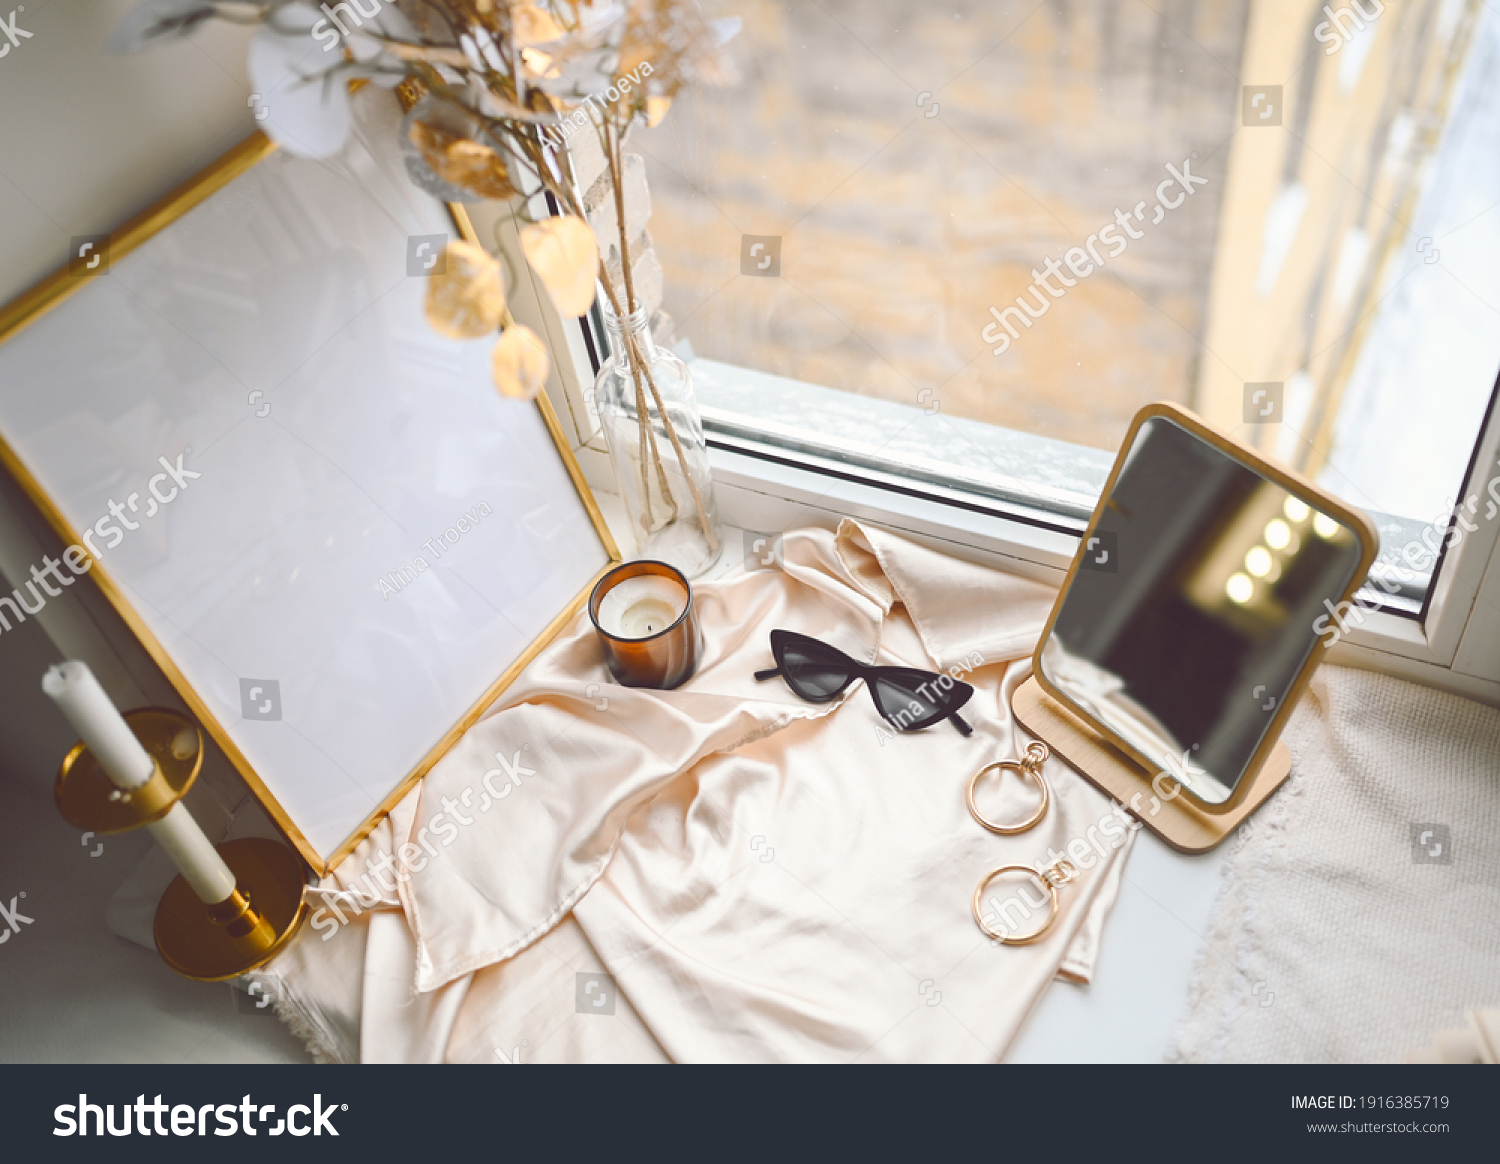 Cozy spring still life feminine scene golden shades. Female styled window sill minimalistic composition. Empty picture mock up poster frame, elegant accessories mirror earrings, dried flowers, candle #1916385719